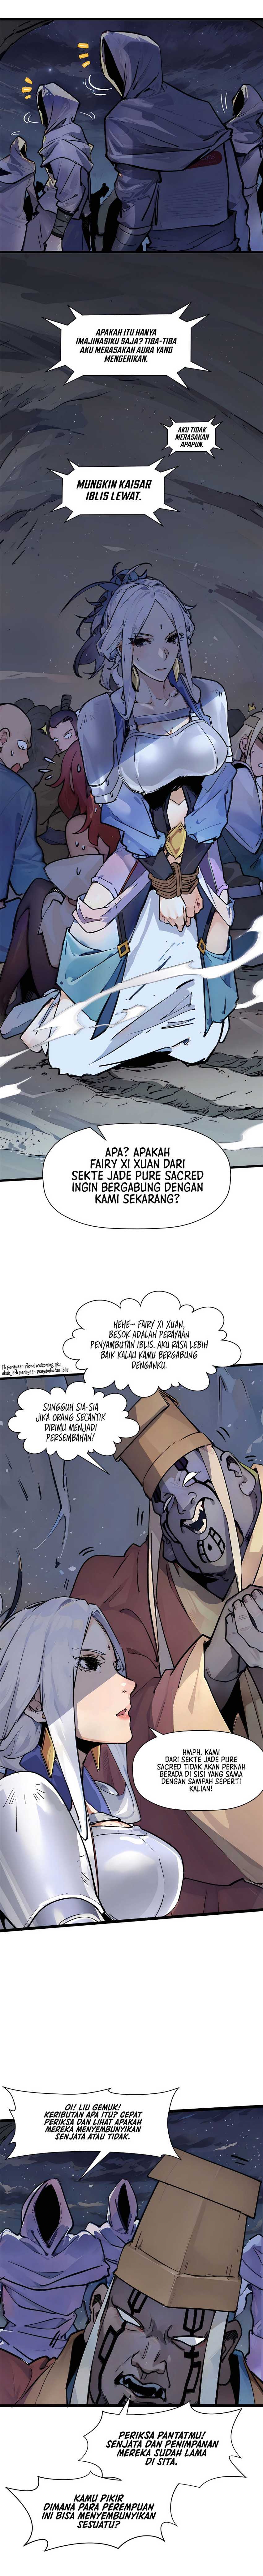 Dilarang COPAS - situs resmi www.mangacanblog.com - Komik top tier providence secretly cultivate for a thousand years 144 - chapter 144 145 Indonesia top tier providence secretly cultivate for a thousand years 144 - chapter 144 Terbaru 5|Baca Manga Komik Indonesia|Mangacan